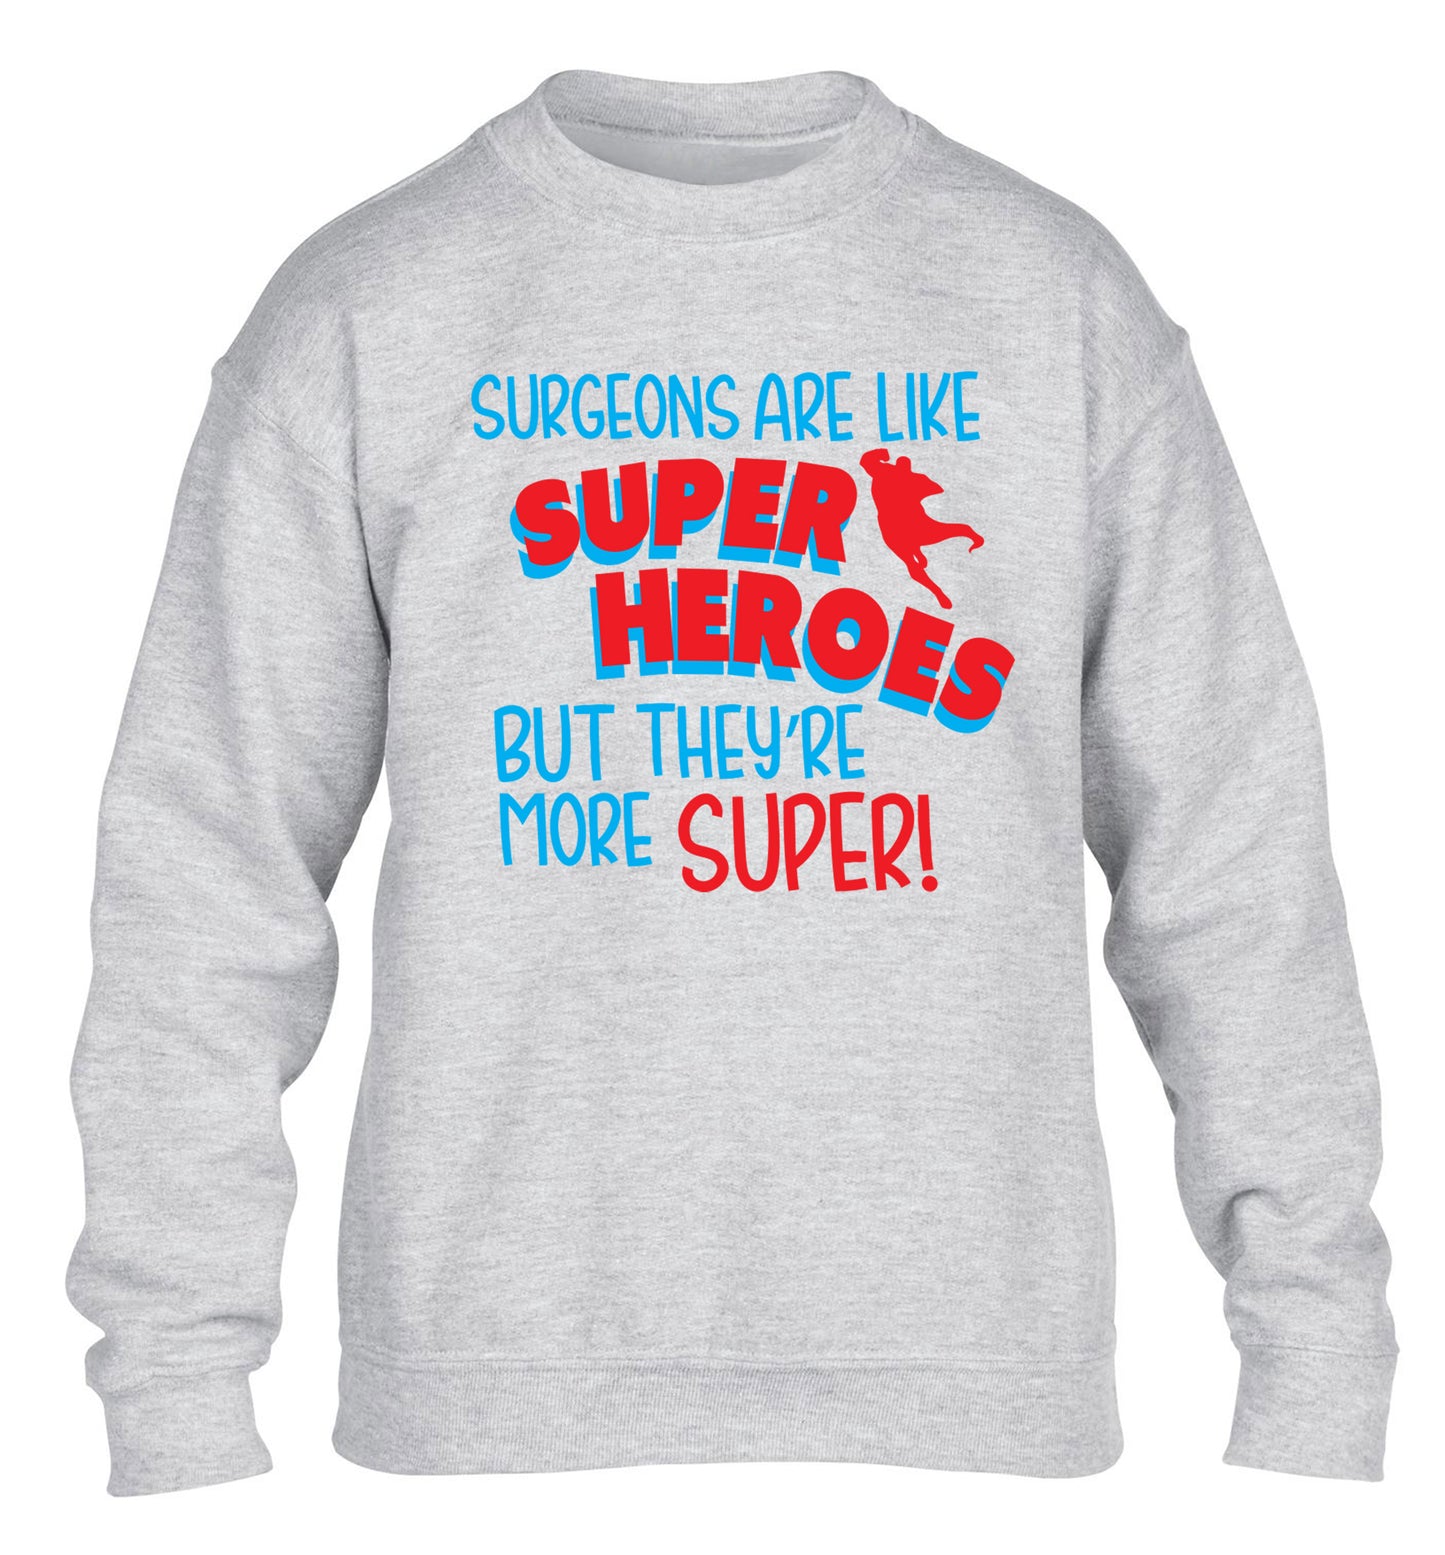 Surgeons are like superheros but they're more super children's grey sweater 12-13 Years